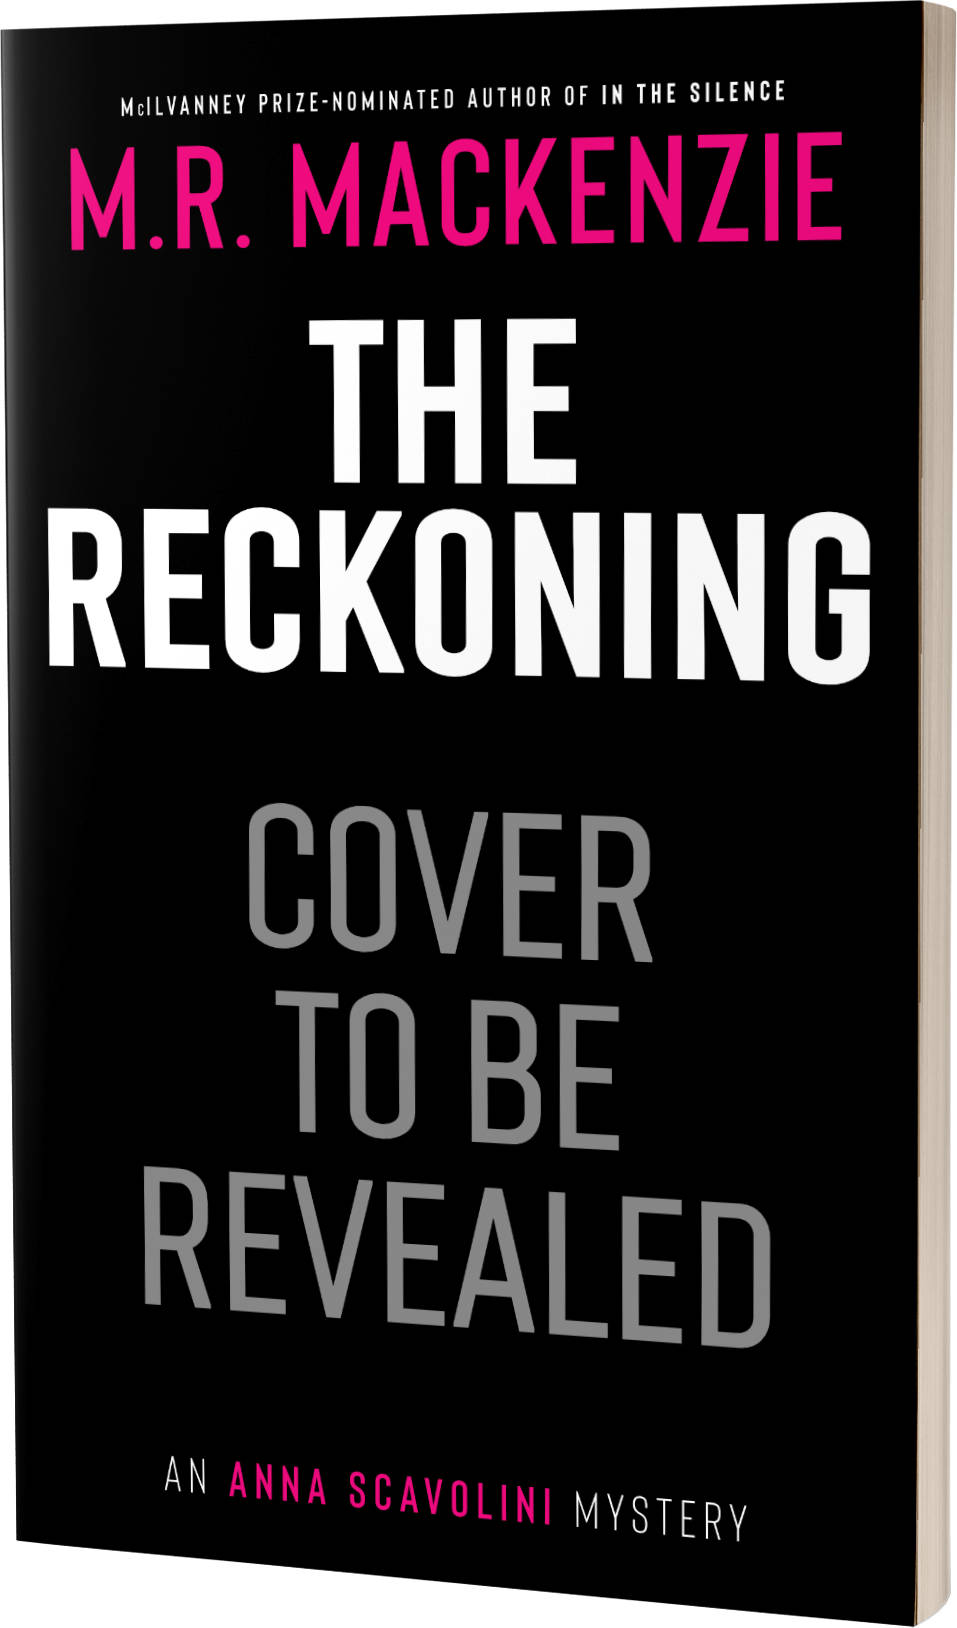 The Reckoning paperback (temporary cover)